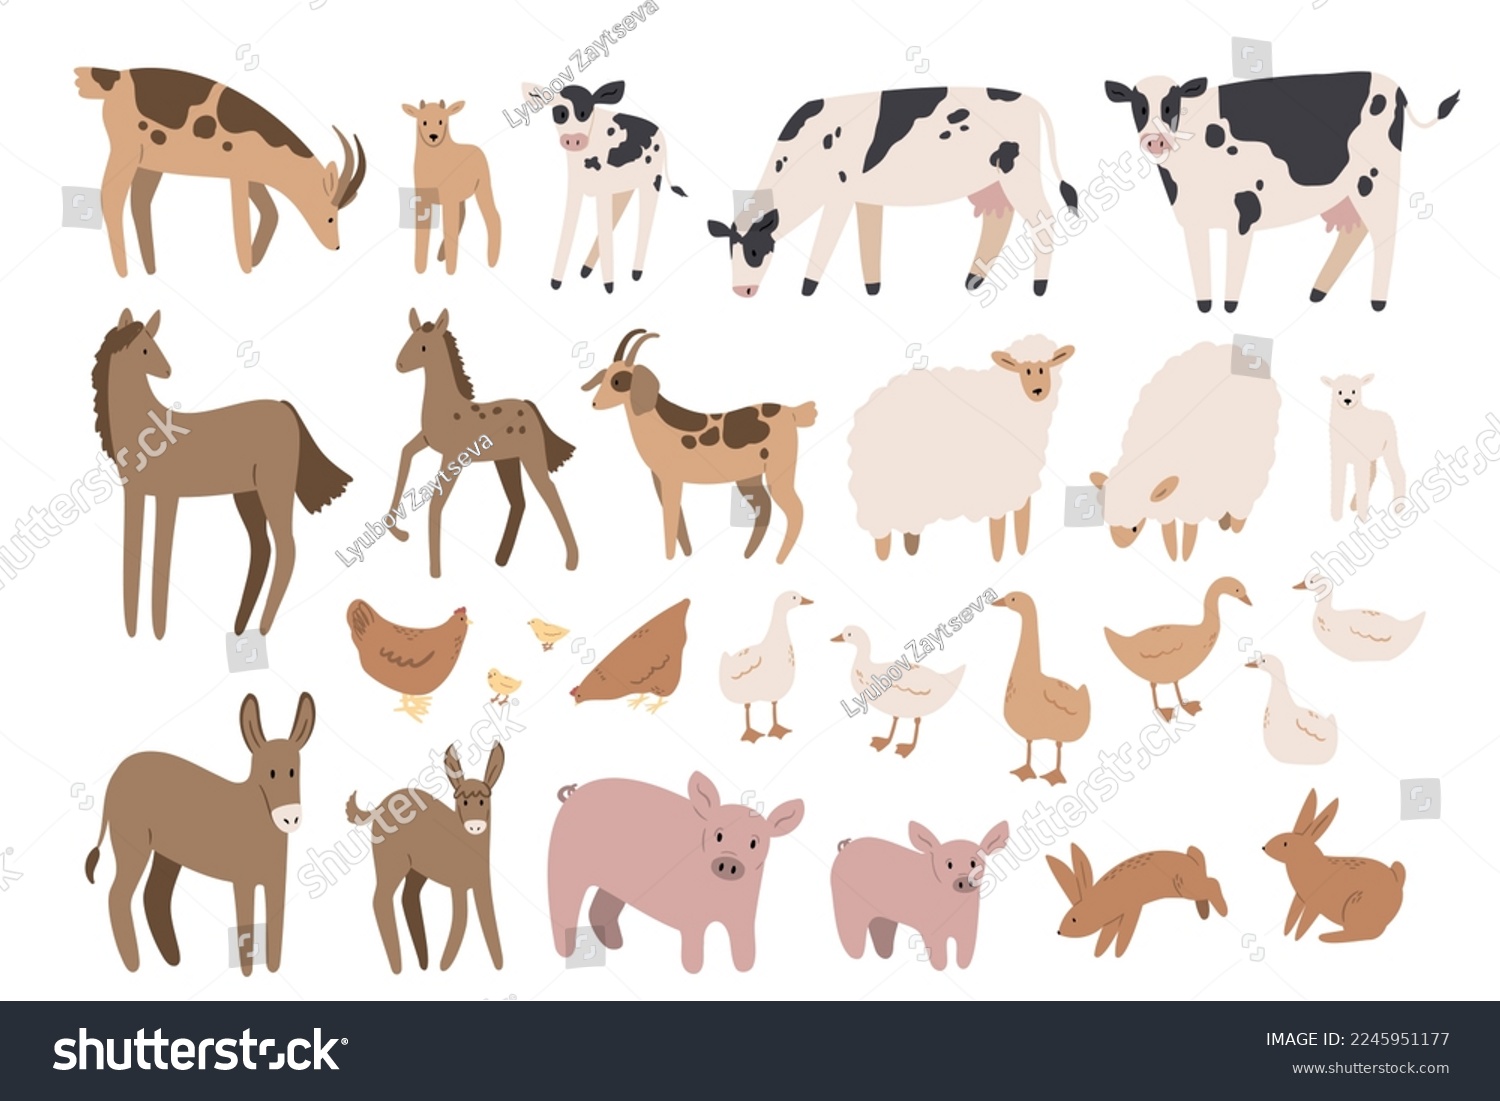 SVG of domestic animals clipart, farm life svg png ai illustrations, farmer flat vector style, chicken, sheep, goat, rabbit, cow, horse, duck, donkey, pig, goose svg